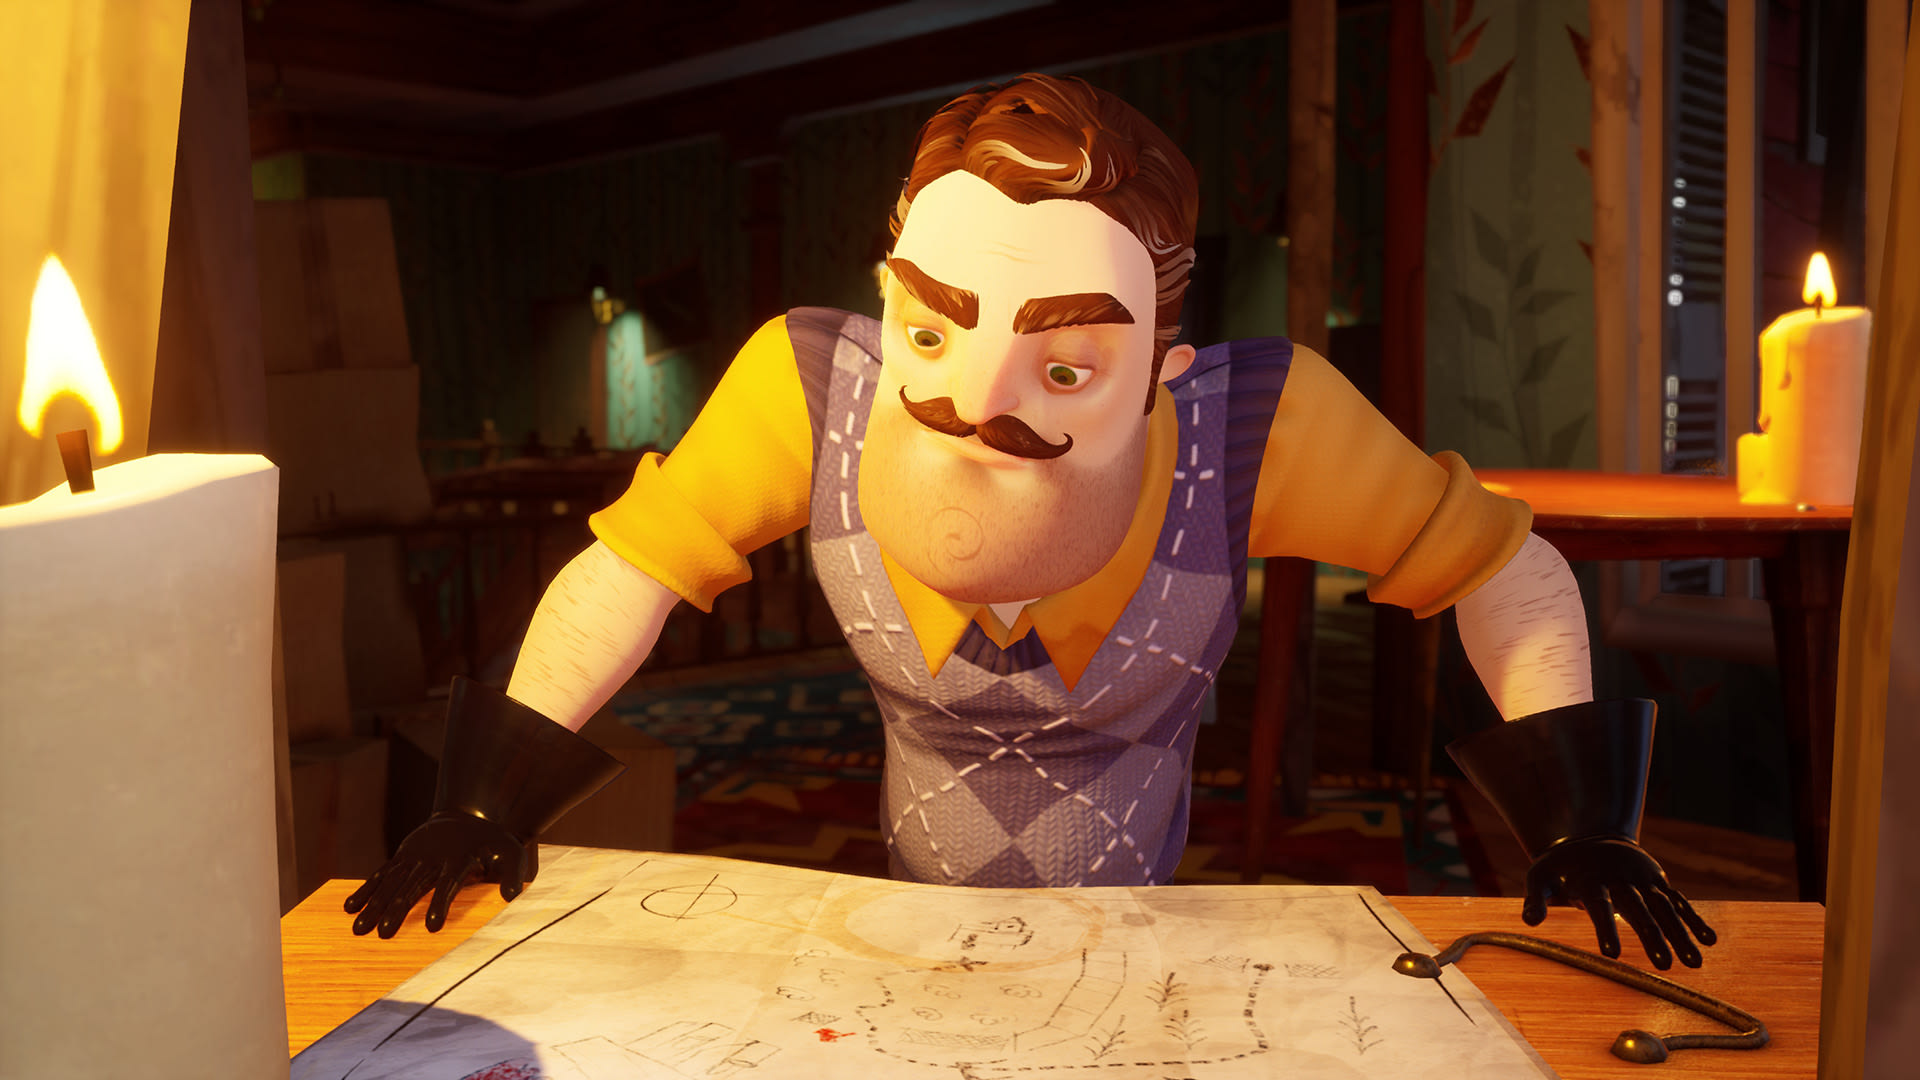 Hello Neighbor 2 (Game): An upcoming stealth horror thriller, Release: December 6th, 2022. 1920x1080 Full HD Wallpaper.